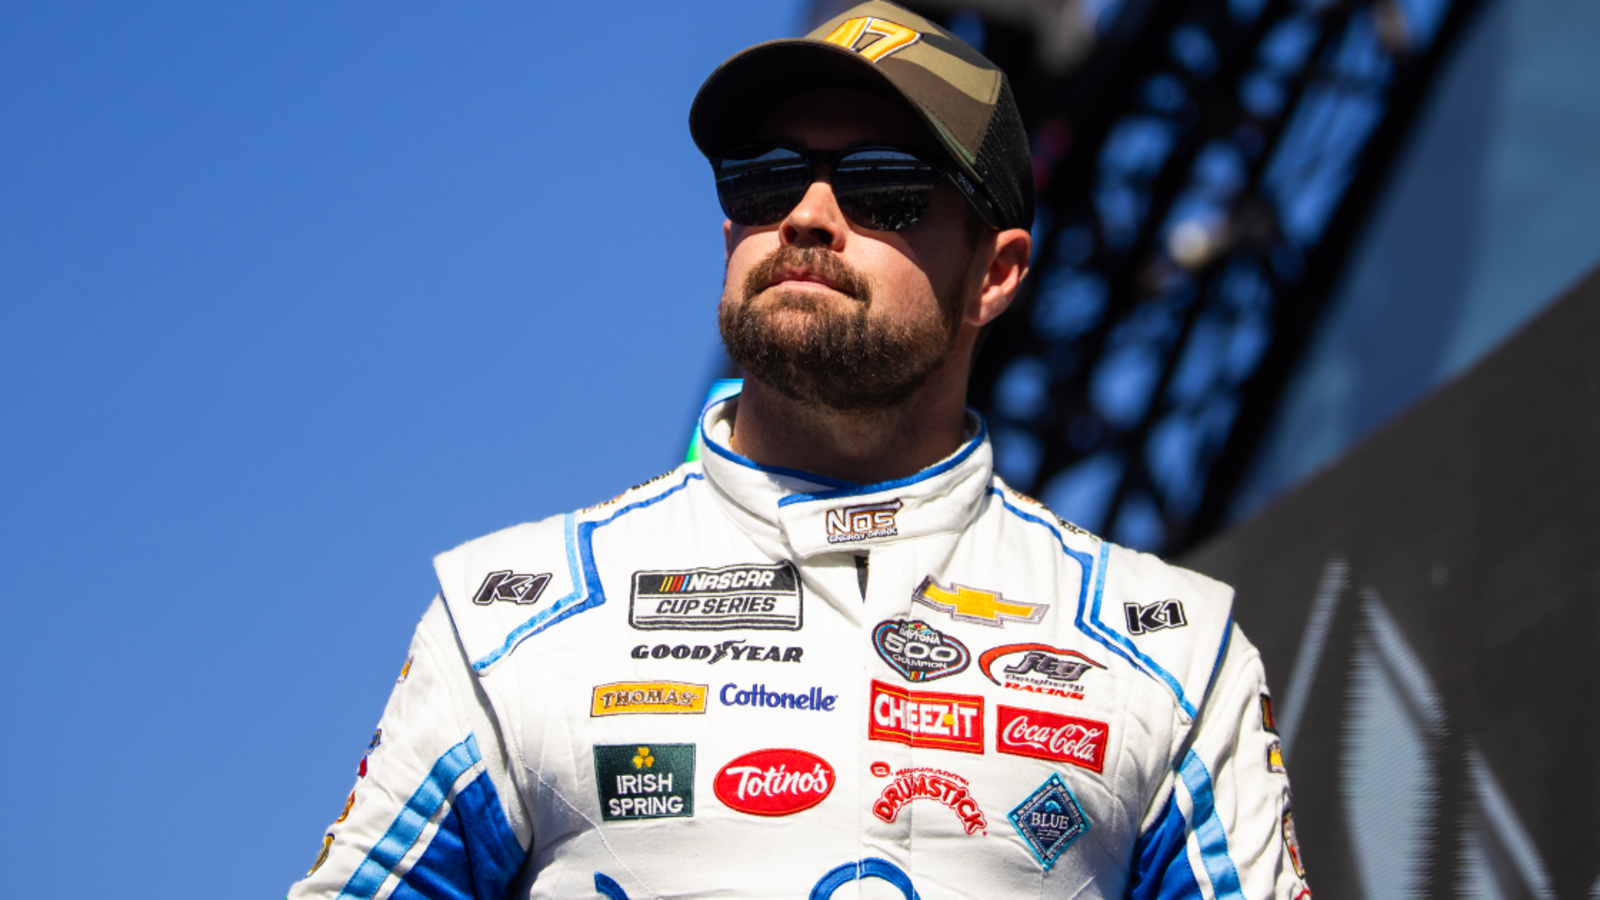 Ricky Stenhouse Jr.’s spotter speaks out about fight with Kyle Busch: ‘Proud of my driver’